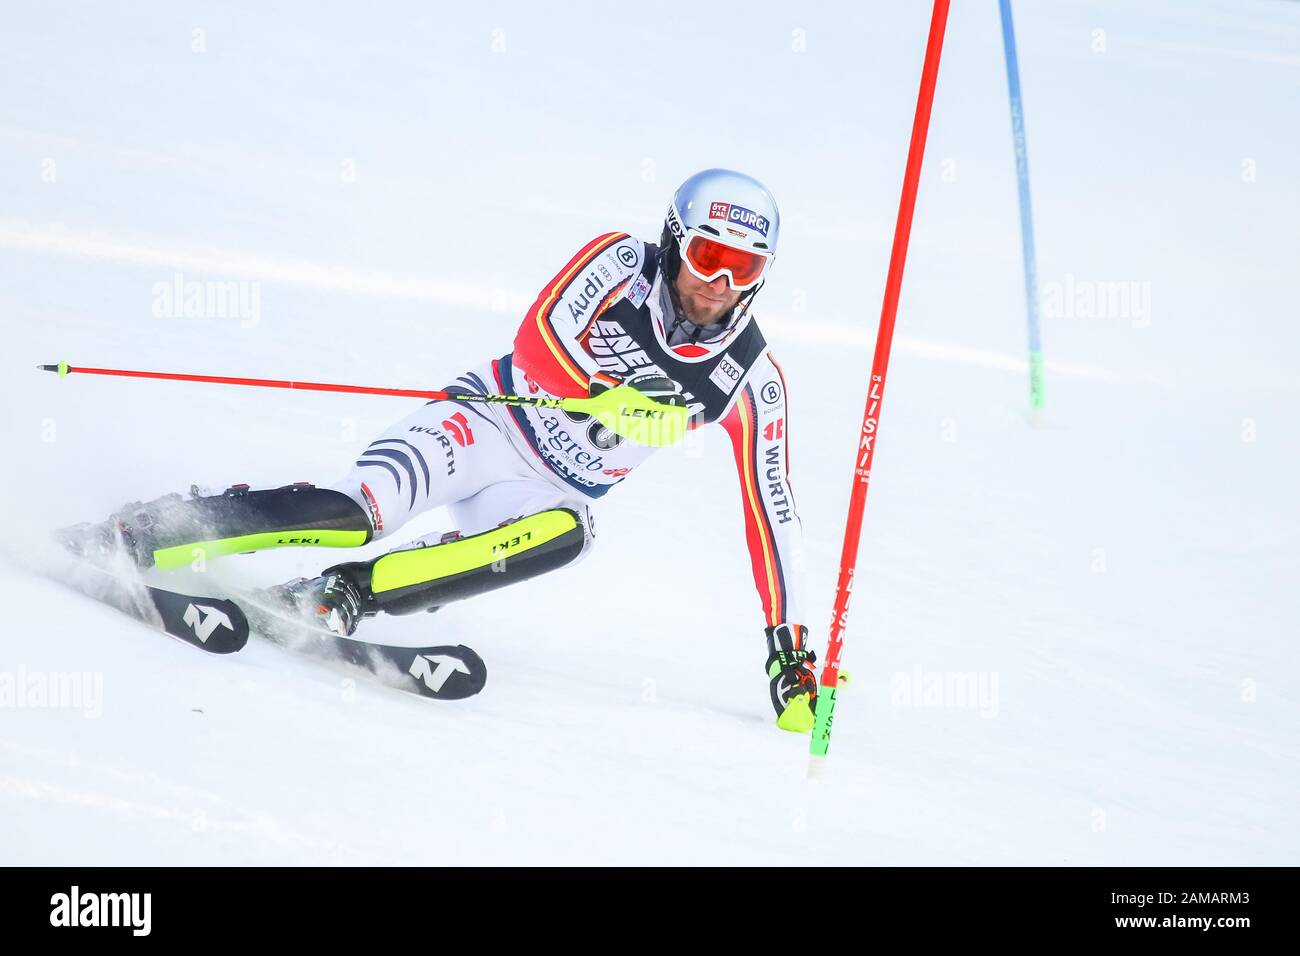 Zagreb, Croatia - January 5, 2020 : Fritz Dopfer from Germany competing during the Audi FIS Alpine Ski World Cup 2019/2020, 3rd Mens Slalom, Snow Quee Stock Photo